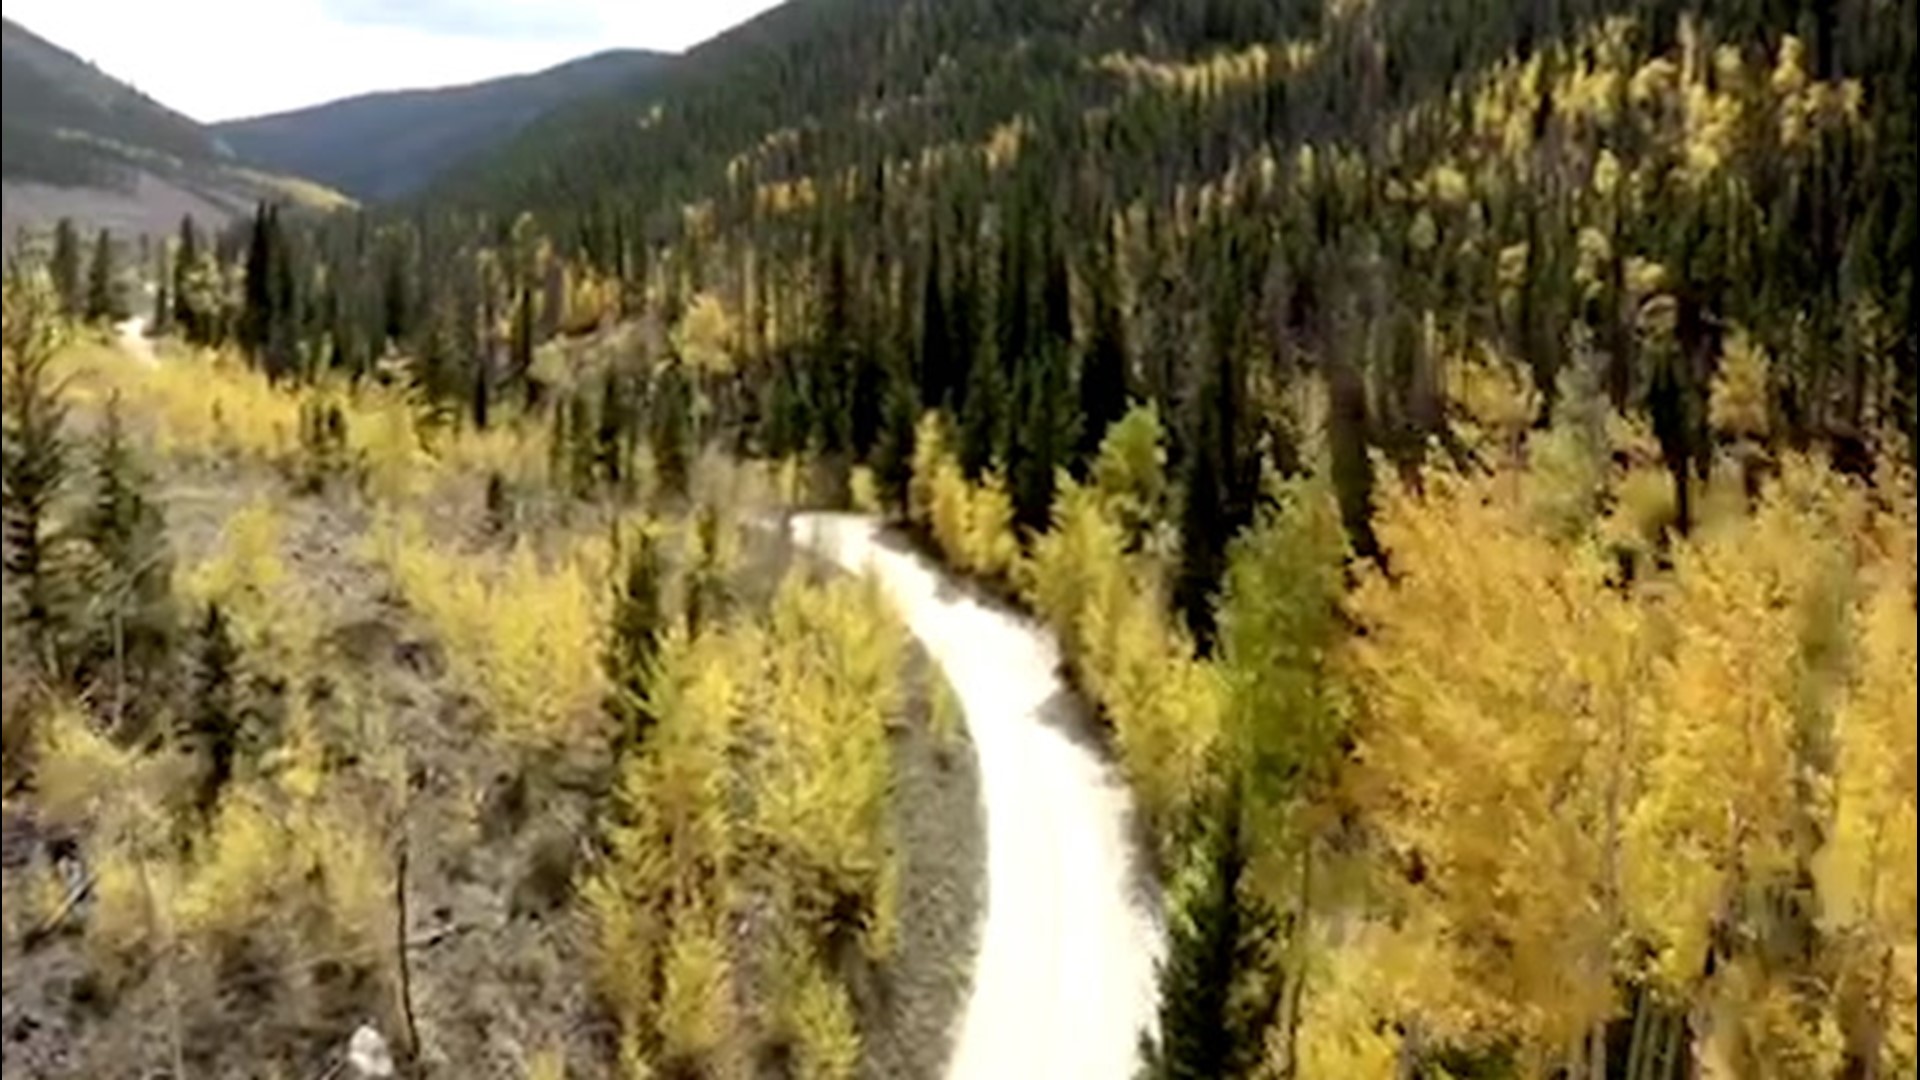 Beautiful fall foliage was spotted in Keystone Gulch, Colorado, on Sept. 22 - the first official day of fall. The leaves were a vibrant yellow color, which popped against the surrounding landscape.